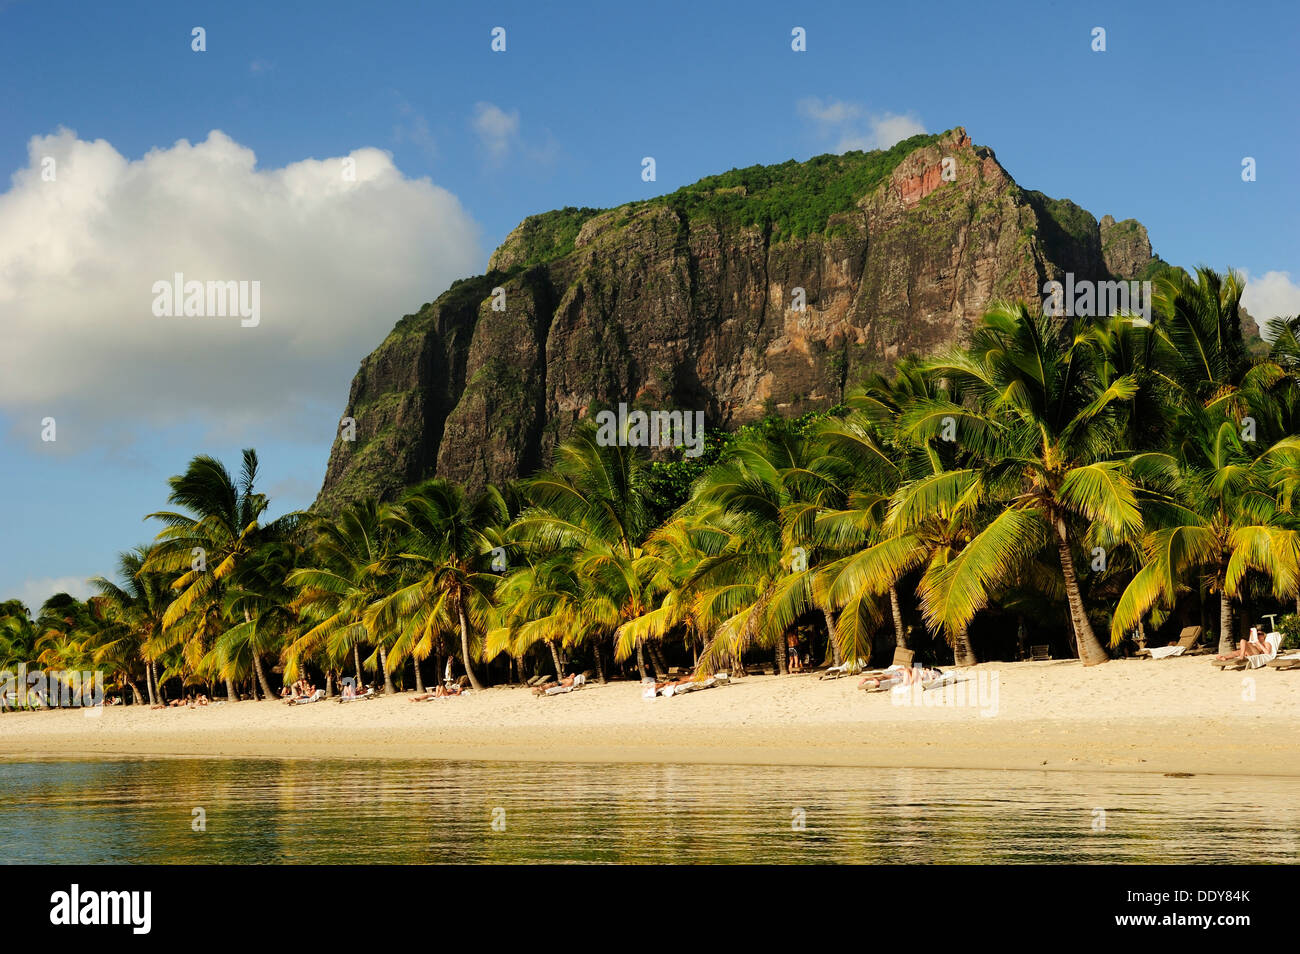 The Le Mont Brabant mountain rising behind palm trees on the sandy beach Stock Photo